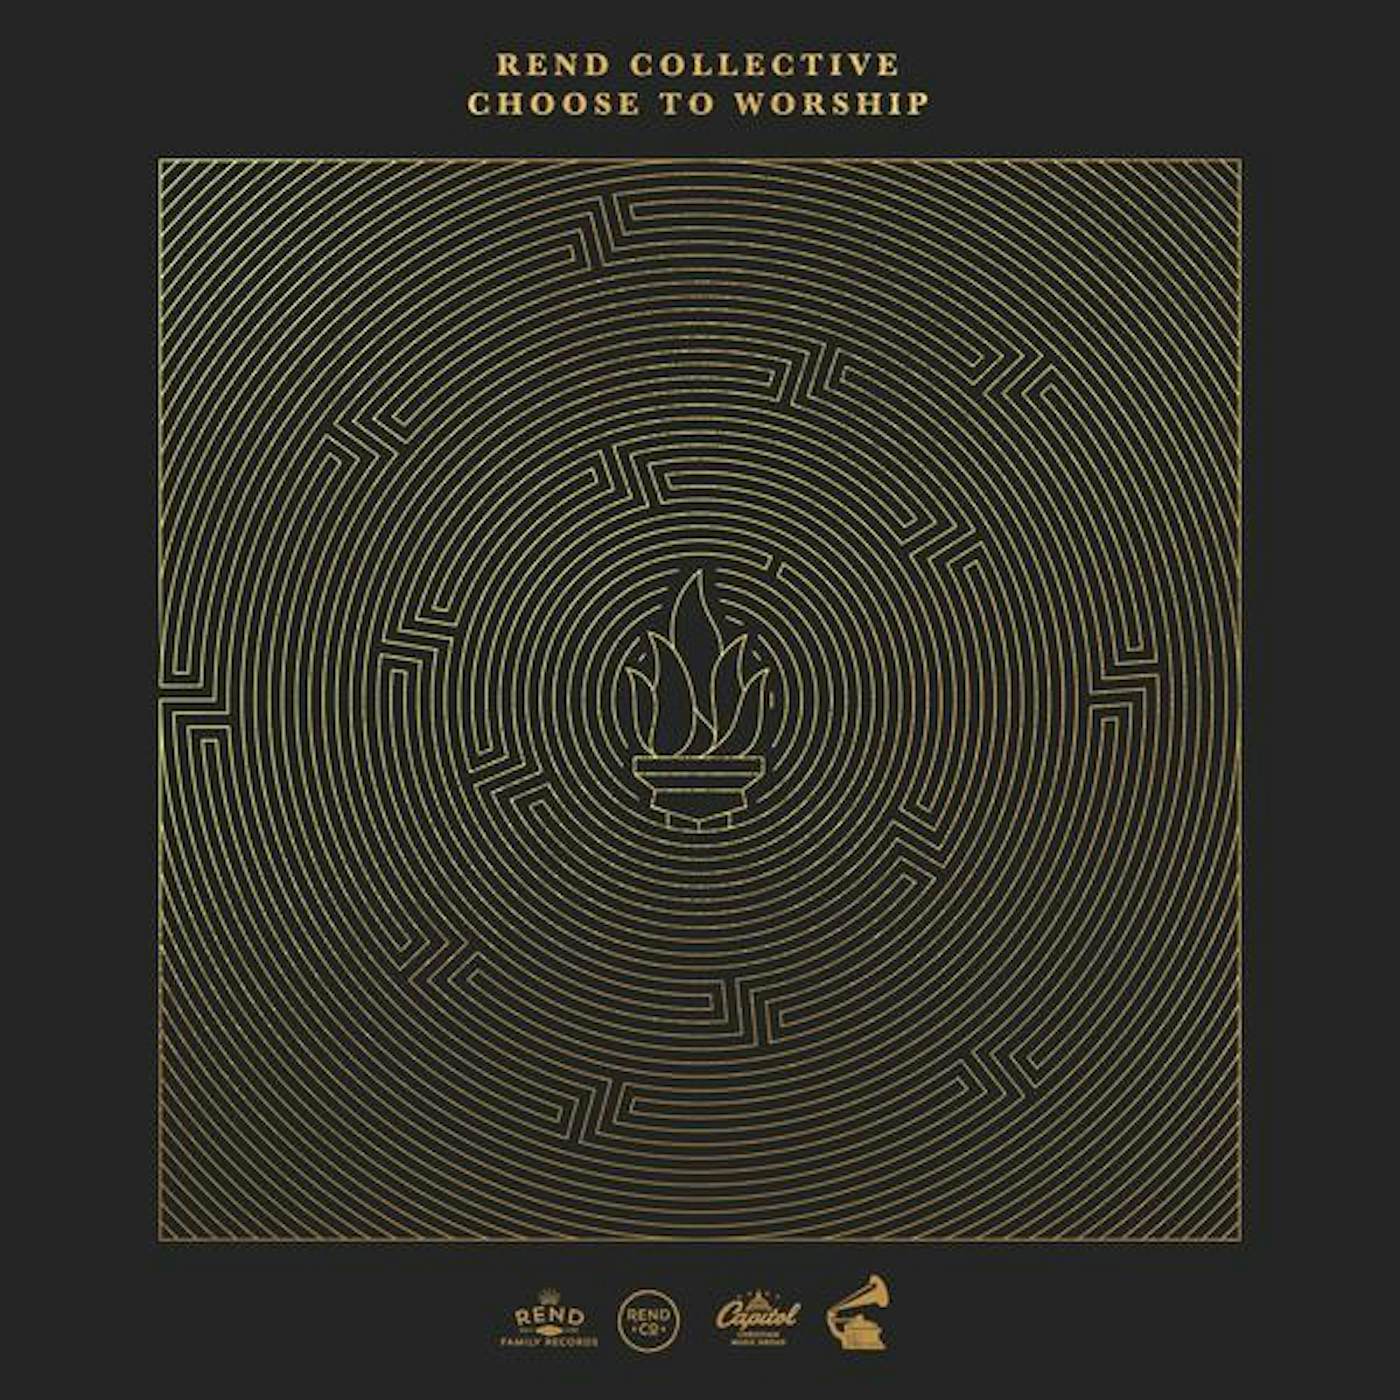 Rend Collective CHOOSE TO WORSHIP Vinyl Record